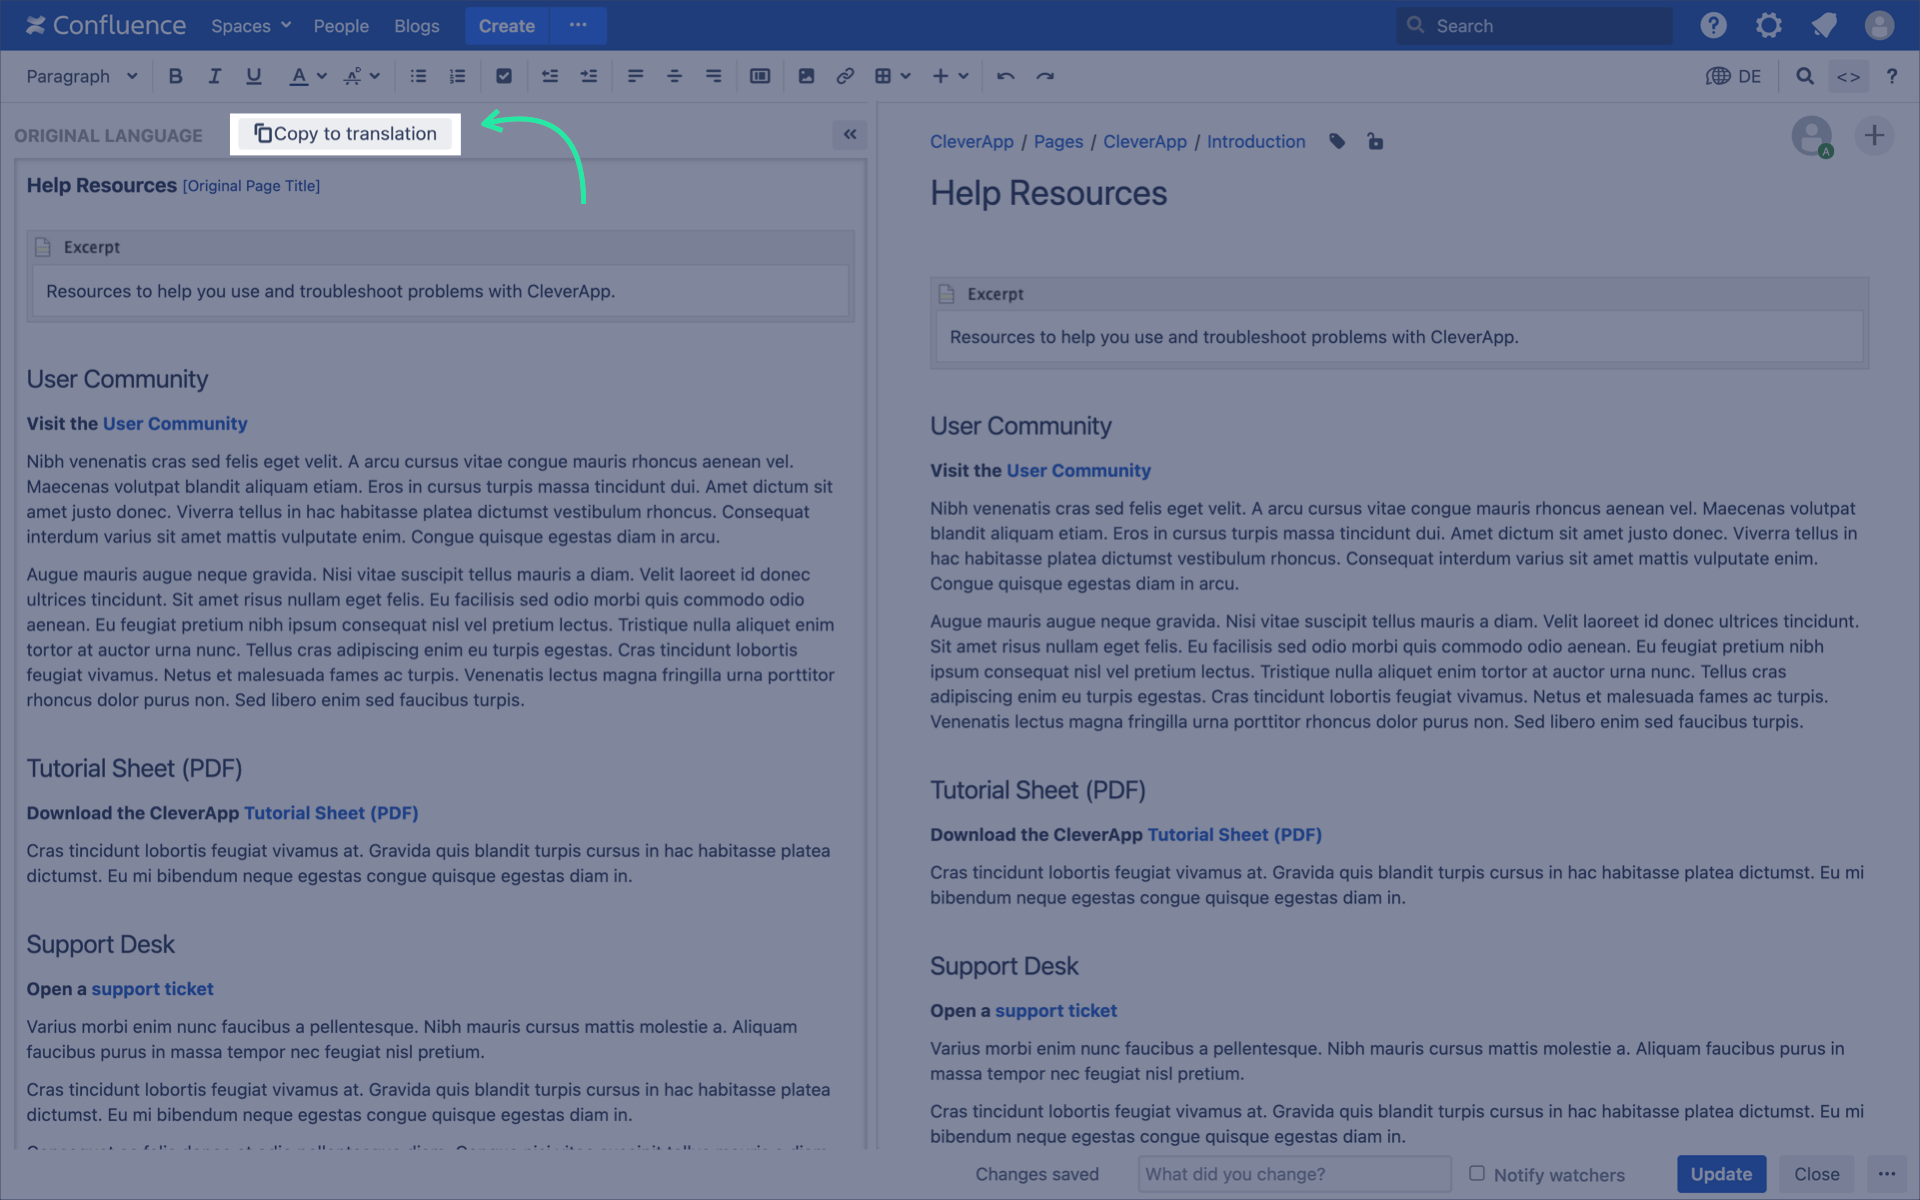 Scroll Translations side-by-side editor in Confluence 